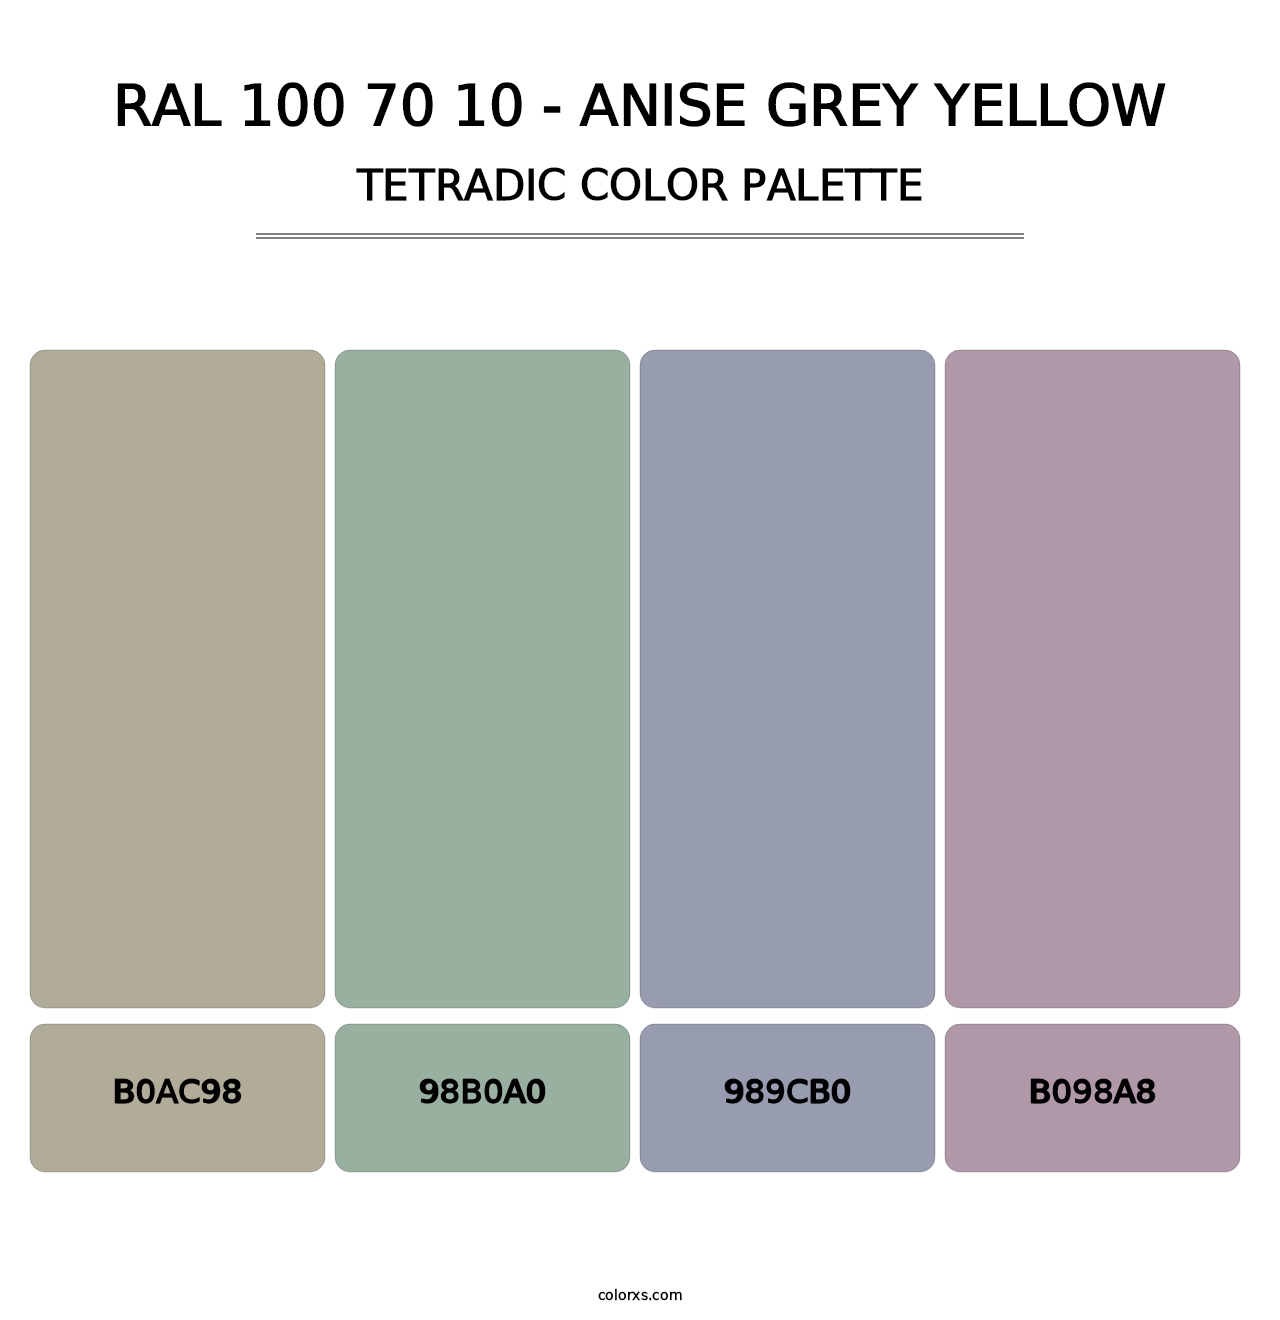 RAL 100 70 10 - Anise Grey Yellow - Tetradic Color Palette